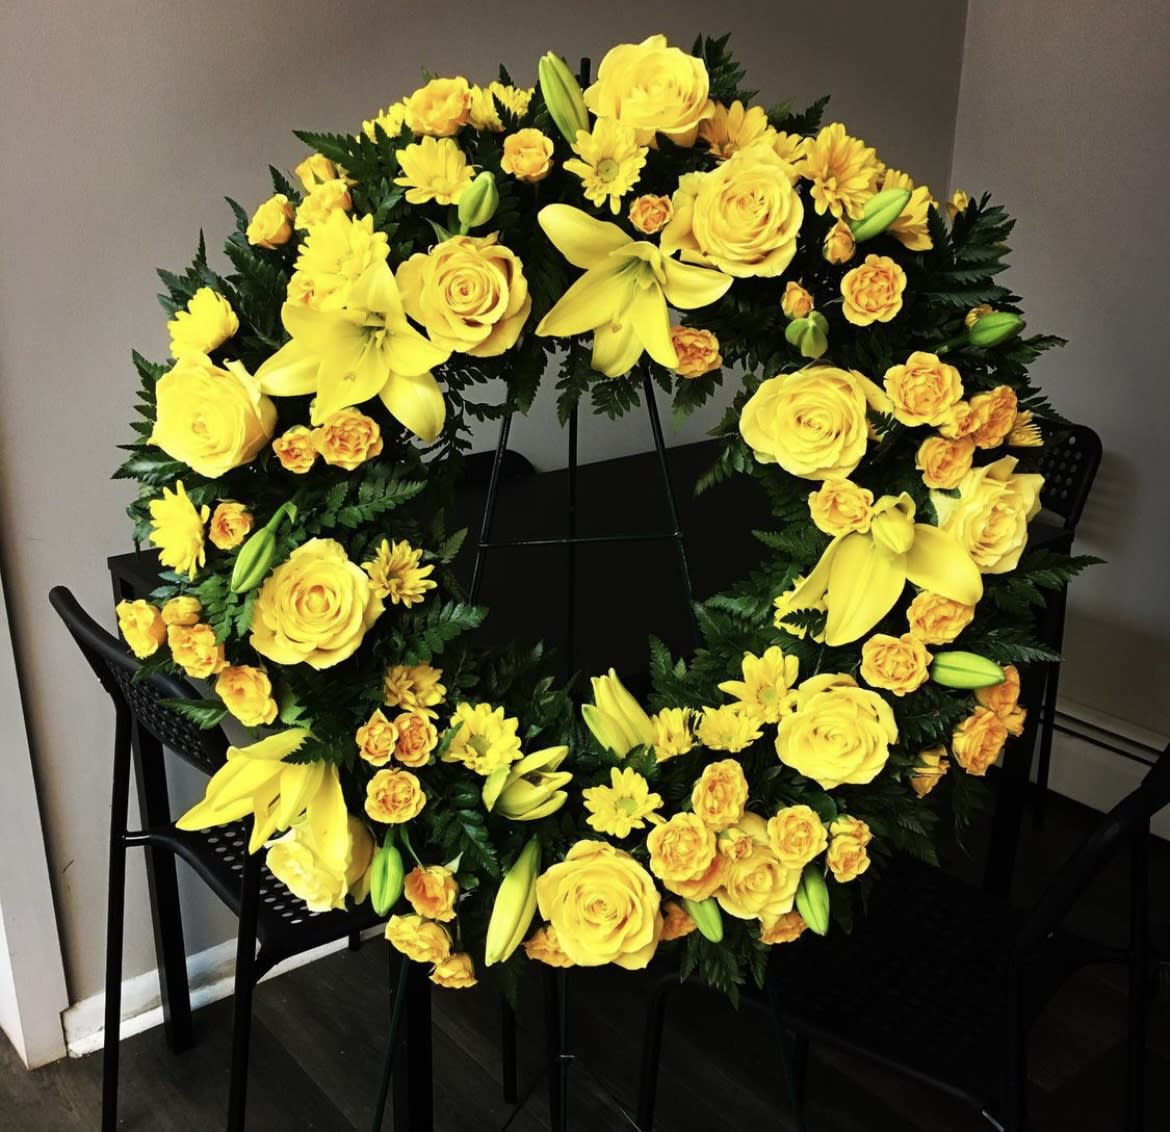 Yellow wreath - Sympathy wreath to send to the viewing. Seasonal yellow flowers on the standing easel.